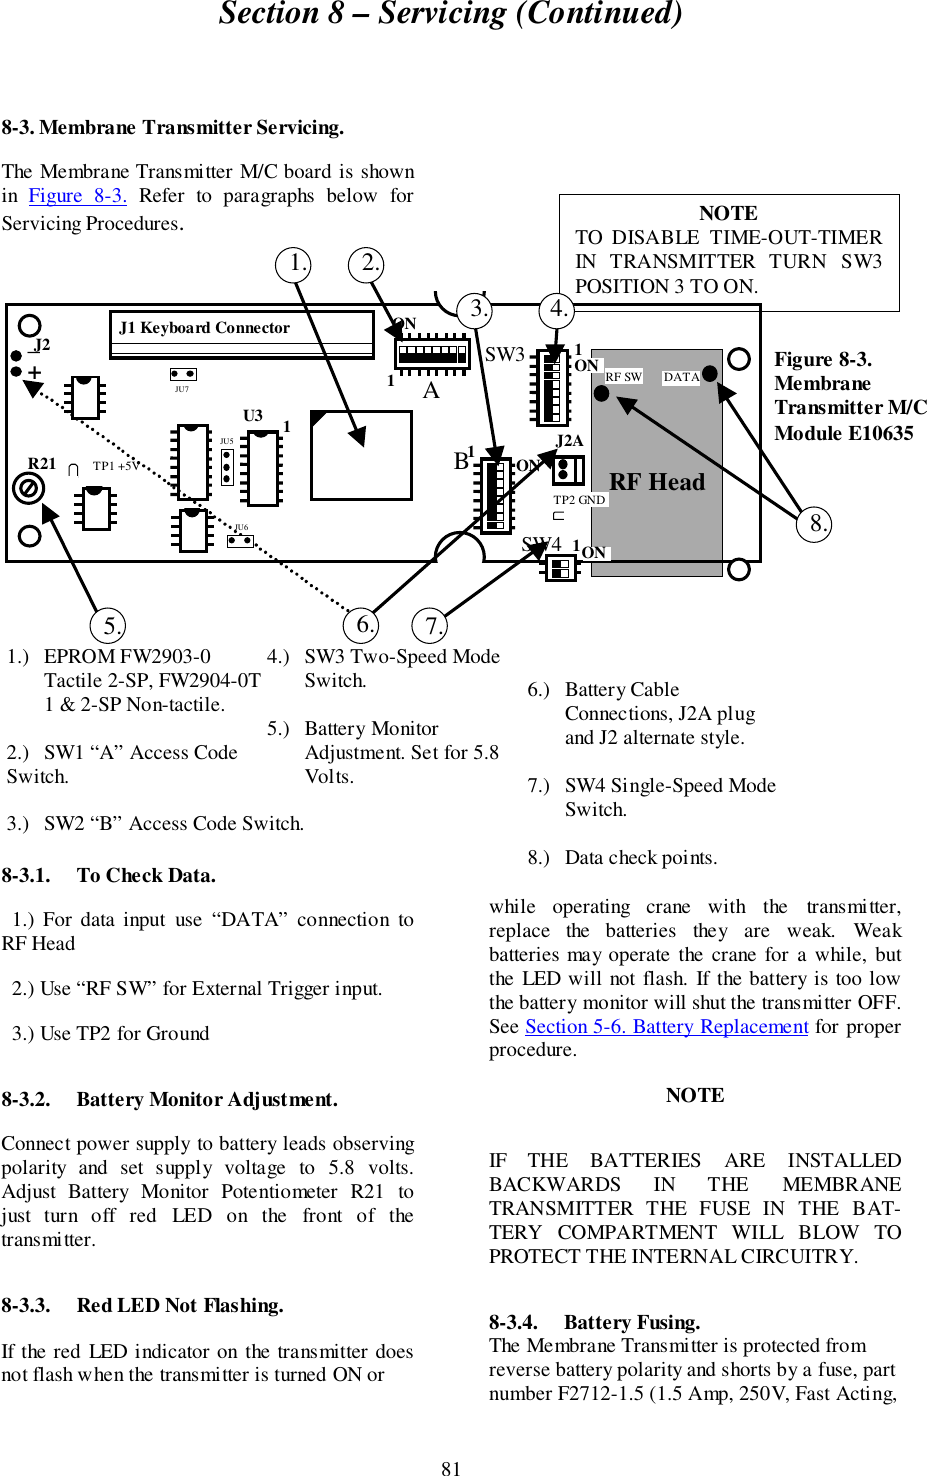 Section 8 – Servicing (Continued)818-3. Membrane Transmitter Servicing.The Membrane Transmitter M/C board is shownin  Figure 8-3. Refer to paragraphs below forServicing Procedures.8-3.1. To Check Data.  1.) For data input use “DATA” connection toRF Head  2.) Use “RF SW” for External Trigger input.  3.) Use TP2 for Ground8-3.2. Battery Monitor Adjustment.Connect power supply to battery leads observingpolarity and set supply voltage to 5.8 volts.Adjust Battery Monitor Potentiometer R21 tojust turn off red LED on the front of thetransmitter.8-3.3. Red LED Not Flashing.If the red LED indicator on the transmitter doesnot flash when the transmitter is turned ON orwhile operating crane with the transmitter,replace the batteries they are weak. Weakbatteries may operate the crane for a while, butthe LED will not flash. If the battery is too lowthe battery monitor will shut the transmitter OFF.See Section 5-6. Battery Replacement for properprocedure.NOTEIF THE BATTERIES ARE INSTALLEDBACKWARDS IN THE MEMBRANETRANSMITTER THE FUSE IN THE BAT-TERY COMPARTMENT WILL BLOW TOPROTECT THE INTERNAL CIRCUITRY.8-3.4. Battery Fusing.The Membrane Transmitter is protected fromreverse battery polarity and shorts by a fuse, partnumber F2712-1.5 (1.5 Amp, 250V, Fast Acting,4.) SW3 Two-Speed ModeSwitch.5.) Battery MonitorAdjustment. Set for 5.8Volts.6.) Battery CableConnections, J2A plugand J2 alternate style.7.) SW4 Single-Speed ModeSwitch.8.) Data check points.1.) EPROM FW2903-0Tactile 2-SP, FW2904-0T1 &amp; 2-SP Non-tactile.2.) SW1 “A” Access CodeSwitch.3.) SW2 “B” Access Code Switch.NOTETO DISABLE TIME-OUT-TIMERIN TRANSMITTER TURN SW3POSITION 3 TO ON.Figure 8-3.MembraneTransmitter M/CModule E10635J1 Keyboard ConnectorRF HeadBONABSW3SW4ONONON1111_+1U3R21J2J2A4.2.3.TP1 +5VJU7JU5JU6TP2 GNDRF SW       DATA8.1.5. 6. 7.